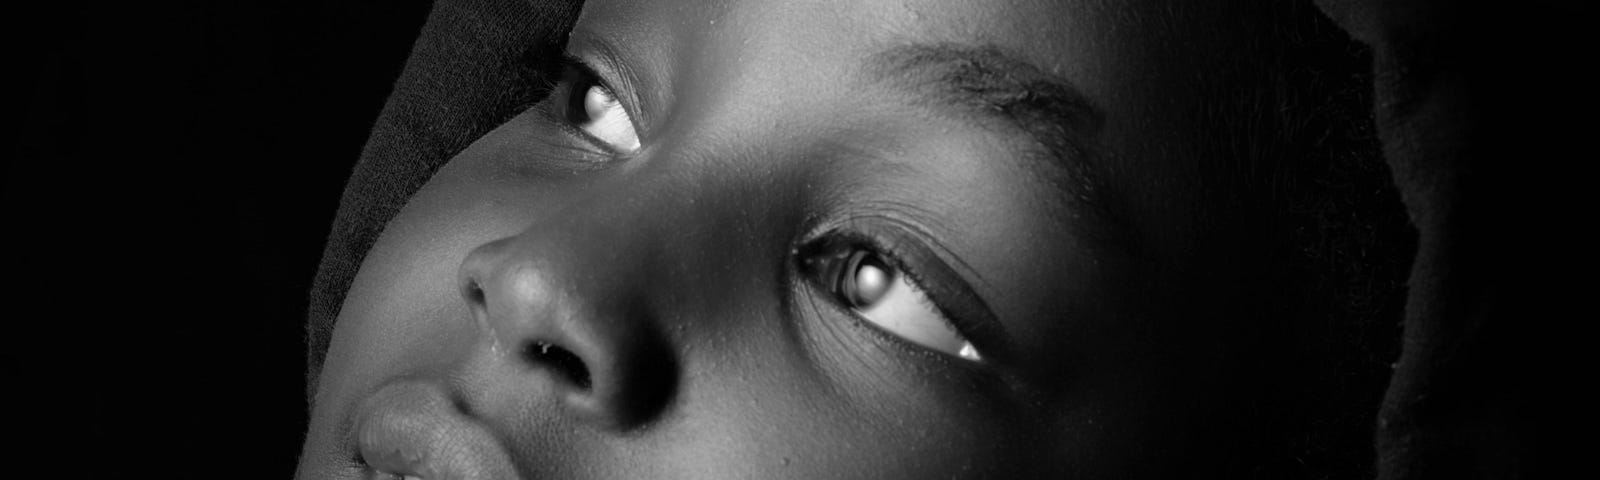 Beautiful child. African. Looking upwards. In black and white. A young mind looks always up.